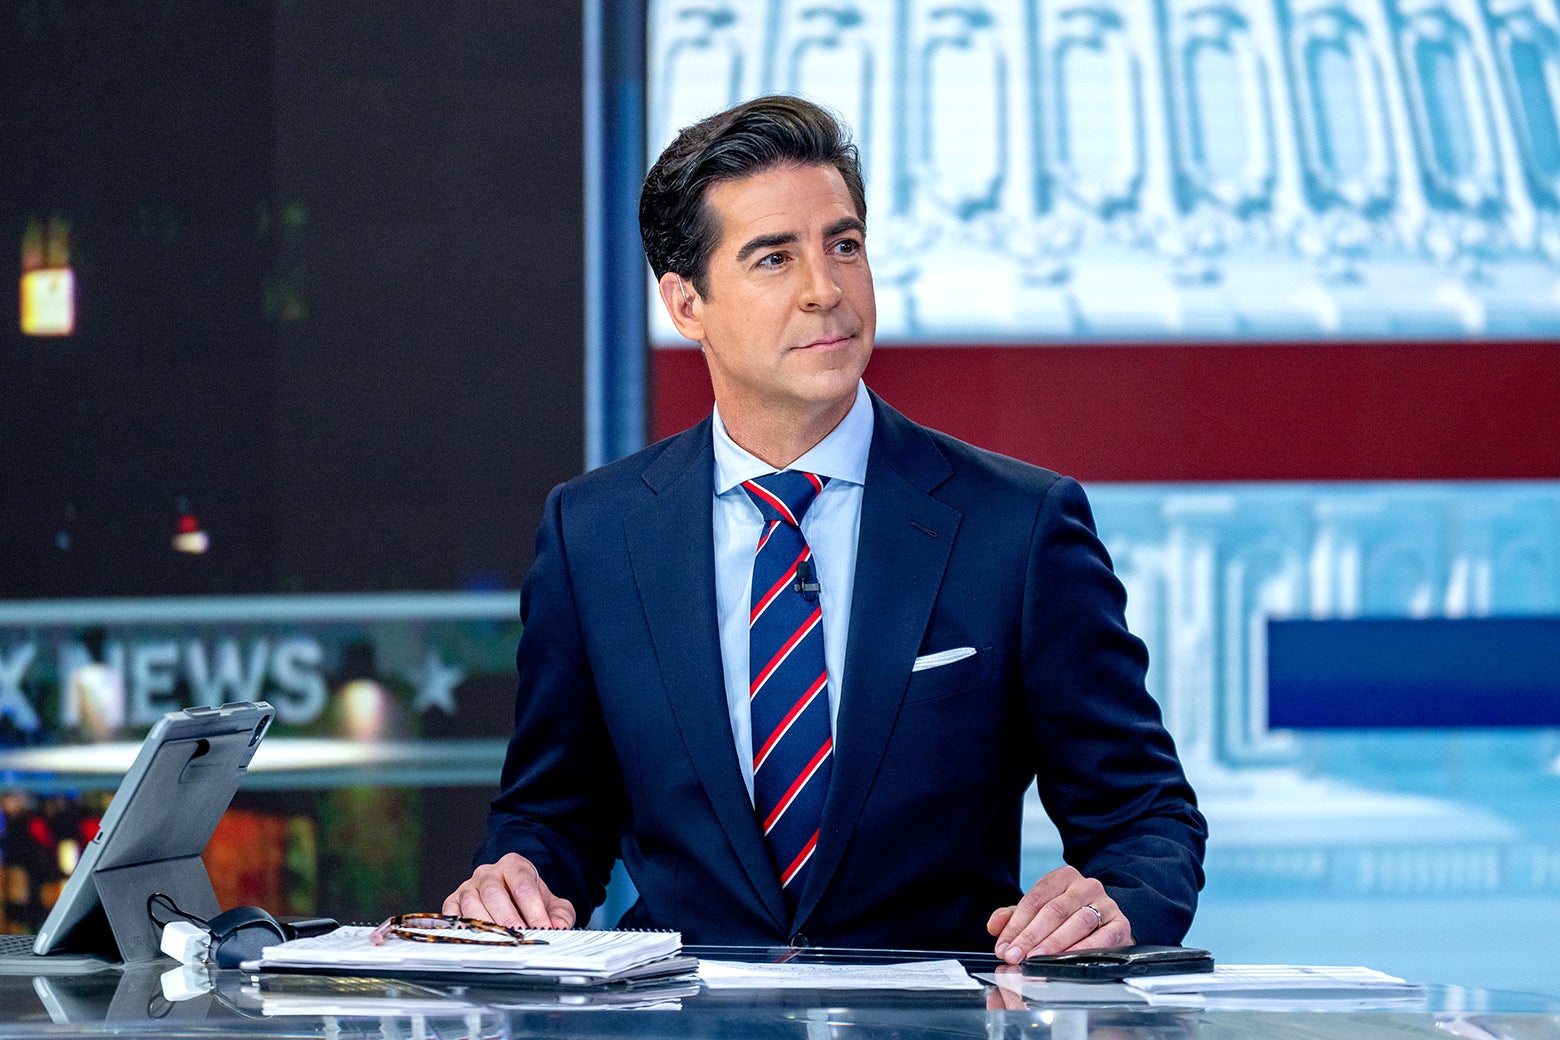 Jesse Watter sits at a desk in the Fox News studio.